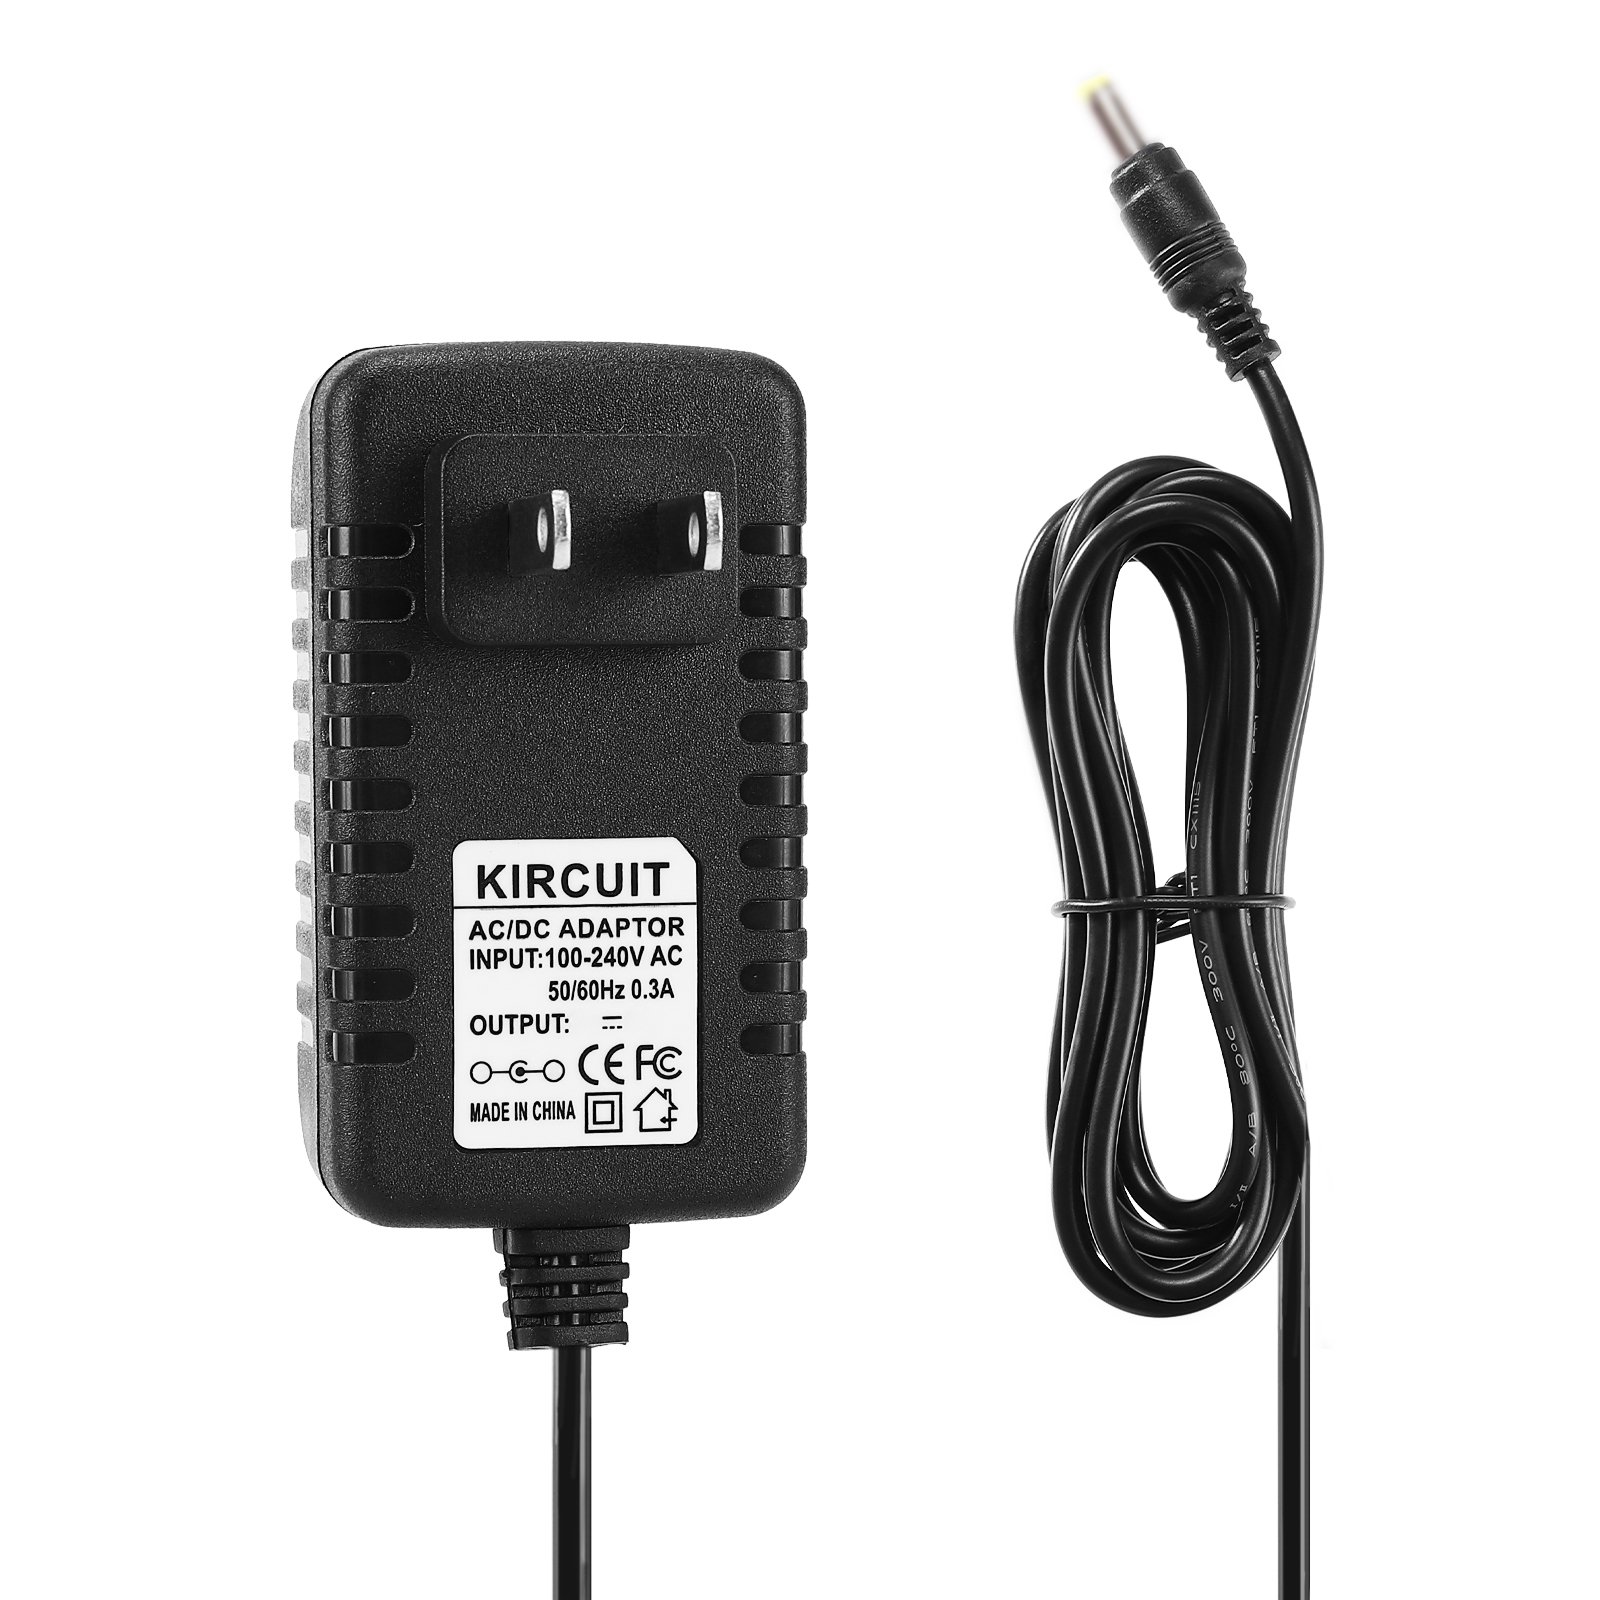 Kircuit 12V AC/DC Adapter Compatible with Roland ACO-120T Model: A41210T Boss Electric Piano Keyboard Class 2 Transformer 12VDC DC12V 12.0V 12 Volts Power Supply Cord Home Wall Charger PSU - image 1 of 4